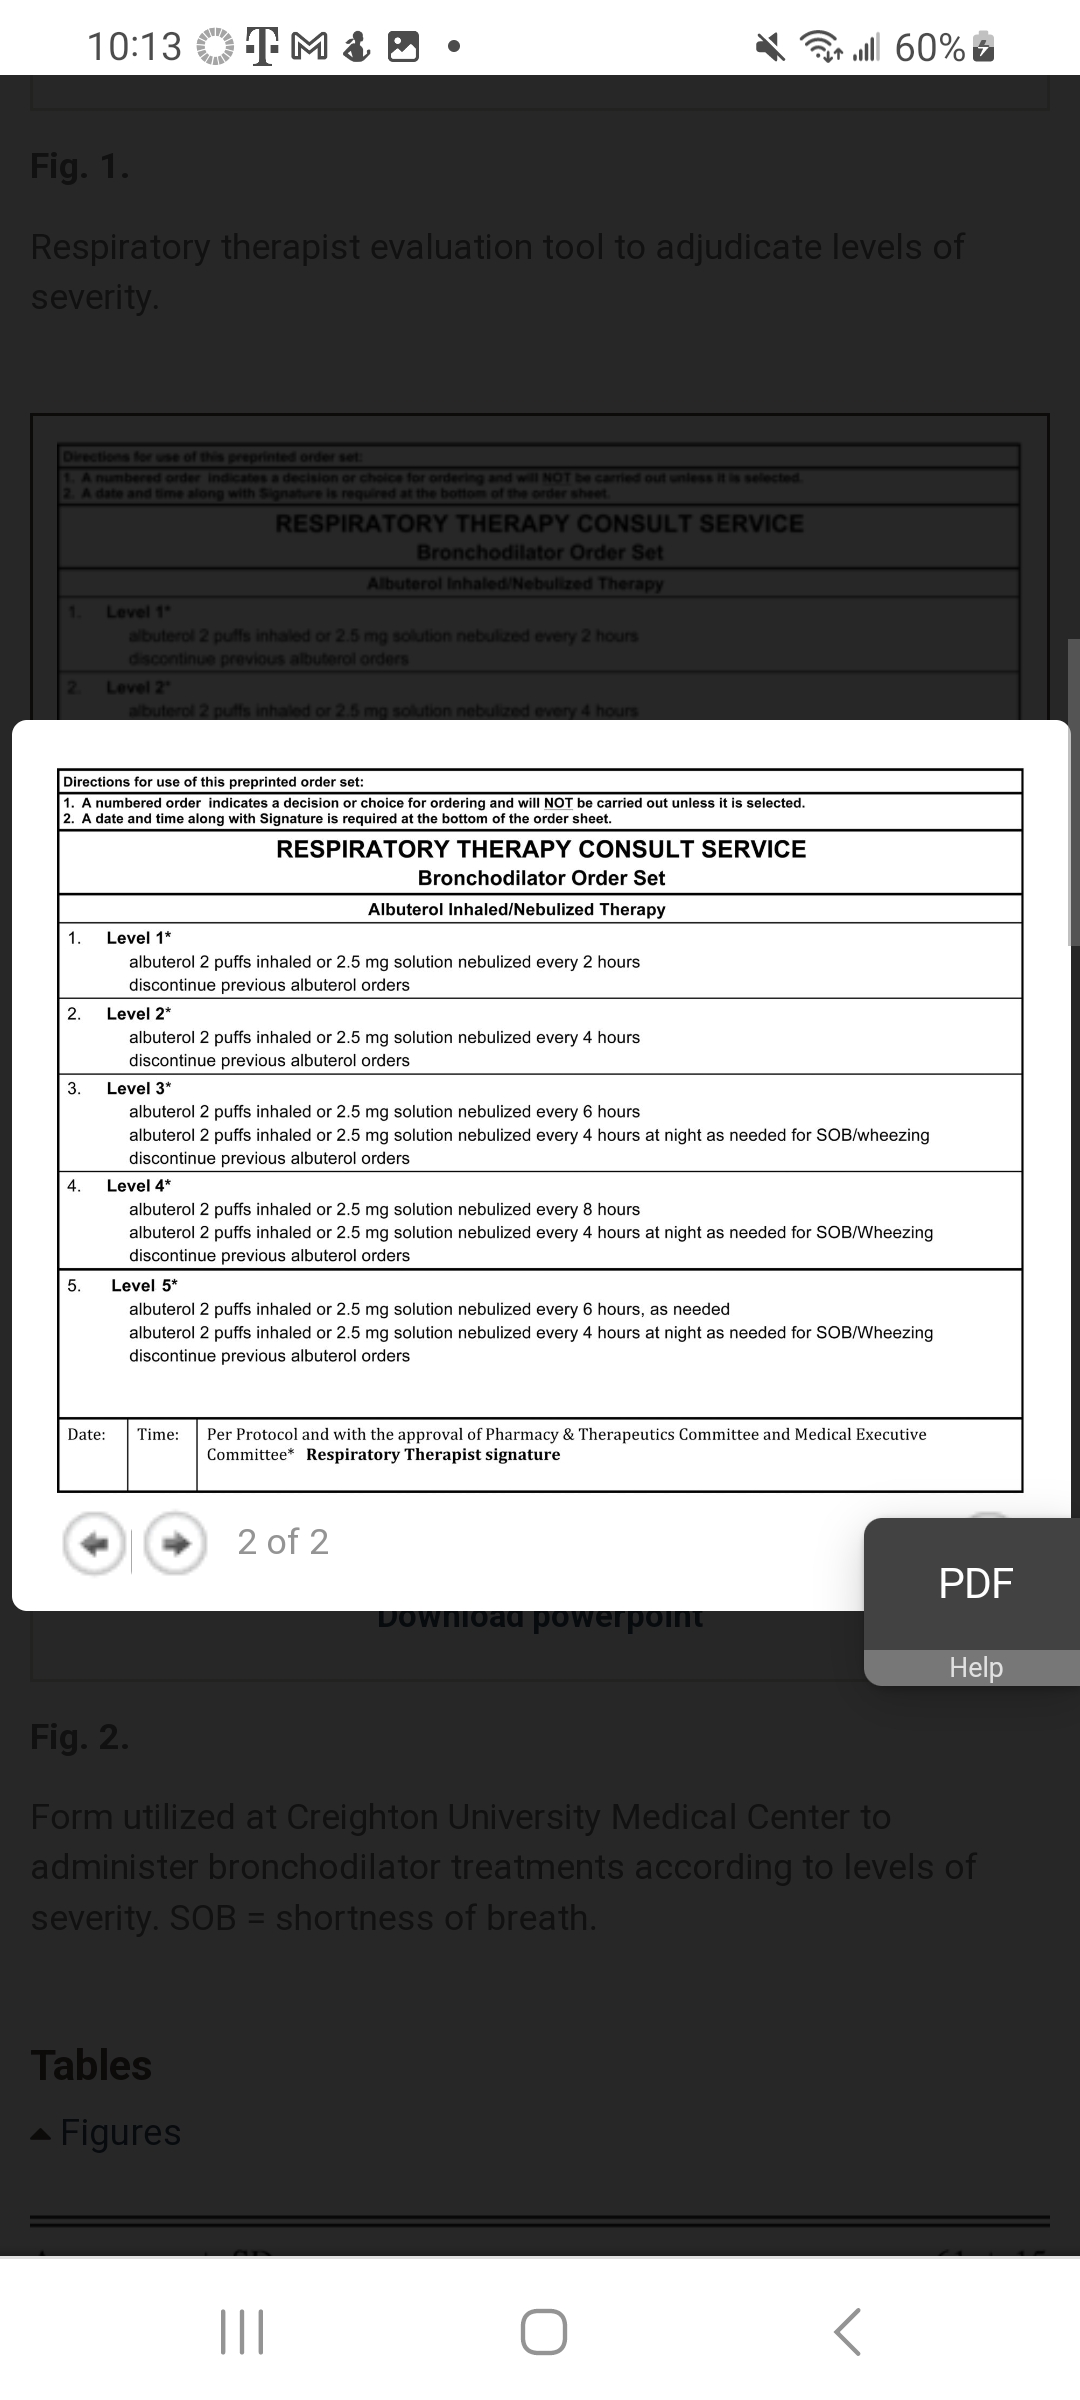 Fig. 1.
Respiratory therapist evaluation tool to adjudicate levels of
severity.
Directions for use of this preprinted order set:
1. A numbered order indicates a decision or choice for ordering and will NOT be carried out unless it is selected.
2. A date and time along with Signature is required at the bottom of the order sheet.
1.
2
1.
2.
10:13 TM & D
3.
Directions for use of this preprinted order set:
1. A numbered order indicates a decision or choice for ordering and will NOT be carried out unless it is selected.
2. A date and time along with Signature is required at the bottom of the order sheet.
4.
5.
Level 1
albuterol 2 puffs inhaled or 2.5 mg solution nebulized every 2 hours
discontinue previous albuterol orders
Level 2
albuterol 2 puffs inhaled or 2.5 mg solution nebulized every 4 hours
RESPIRATORY THERAPY CONSULT SERVICE
Bronchodilator Order Set
Albuterol Inhaled/Nebulized Therapy
Date:
Level 1*
albuterol 2 puffs inhaled or 2.5 mg solution nebulized every 2 hours
discontinue previous albuterol orders
Level 2*
albuterol 2 puffs inhaled or 2.5 mg solution nebulized every 4 hours
discontinue previous albuterol orders
RESPIRATORY THERAPY CONSULT SERVICE
Bronchodilator Order Set
Albuterol Inhaled/Nebulized Therapy
Level 3*
albuterol 2 puffs inhaled or 2.5 mg solution nebulized every 6 hours
albuterol 2 puffs inhaled or 2.5 mg solution nebulized every 4 hours at night as needed for SOB/wheezing
discontinue previous albuterol orders
Level 4*
albuterol 2 puffs inhaled or 2.5 mg solution nebulized every 8 hours
albuterol 2 puffs inhaled or 2.5 mg solution nebulized every 4 hours at night as needed for SOB/Wheezing
discontinue previous albuterol orders
Level 5*
albuterol 2 puffs inhaled or 2.5 mg solution nebulized every 6 hours, as needed
albuterol 2 puffs inhaled or 2.5 mg solution nebulized every 4 hours at night as needed for SOB/Wheezing
discontinue previous albuterol orders
Tables
| 60% الله
Time: Per Protocol and with the approval of Pharmacy & Therapeutics Committee and Medical Executive
Committee* Respiratory Therapist signature
Figures
2 of 2
|||
Download powerpoint
Fig. 2.
Form utilized at Creighton University Medical Center to
administer bronchodilator treatments according to levels of
severity. SOB = shortness of breath.
PDF
Help